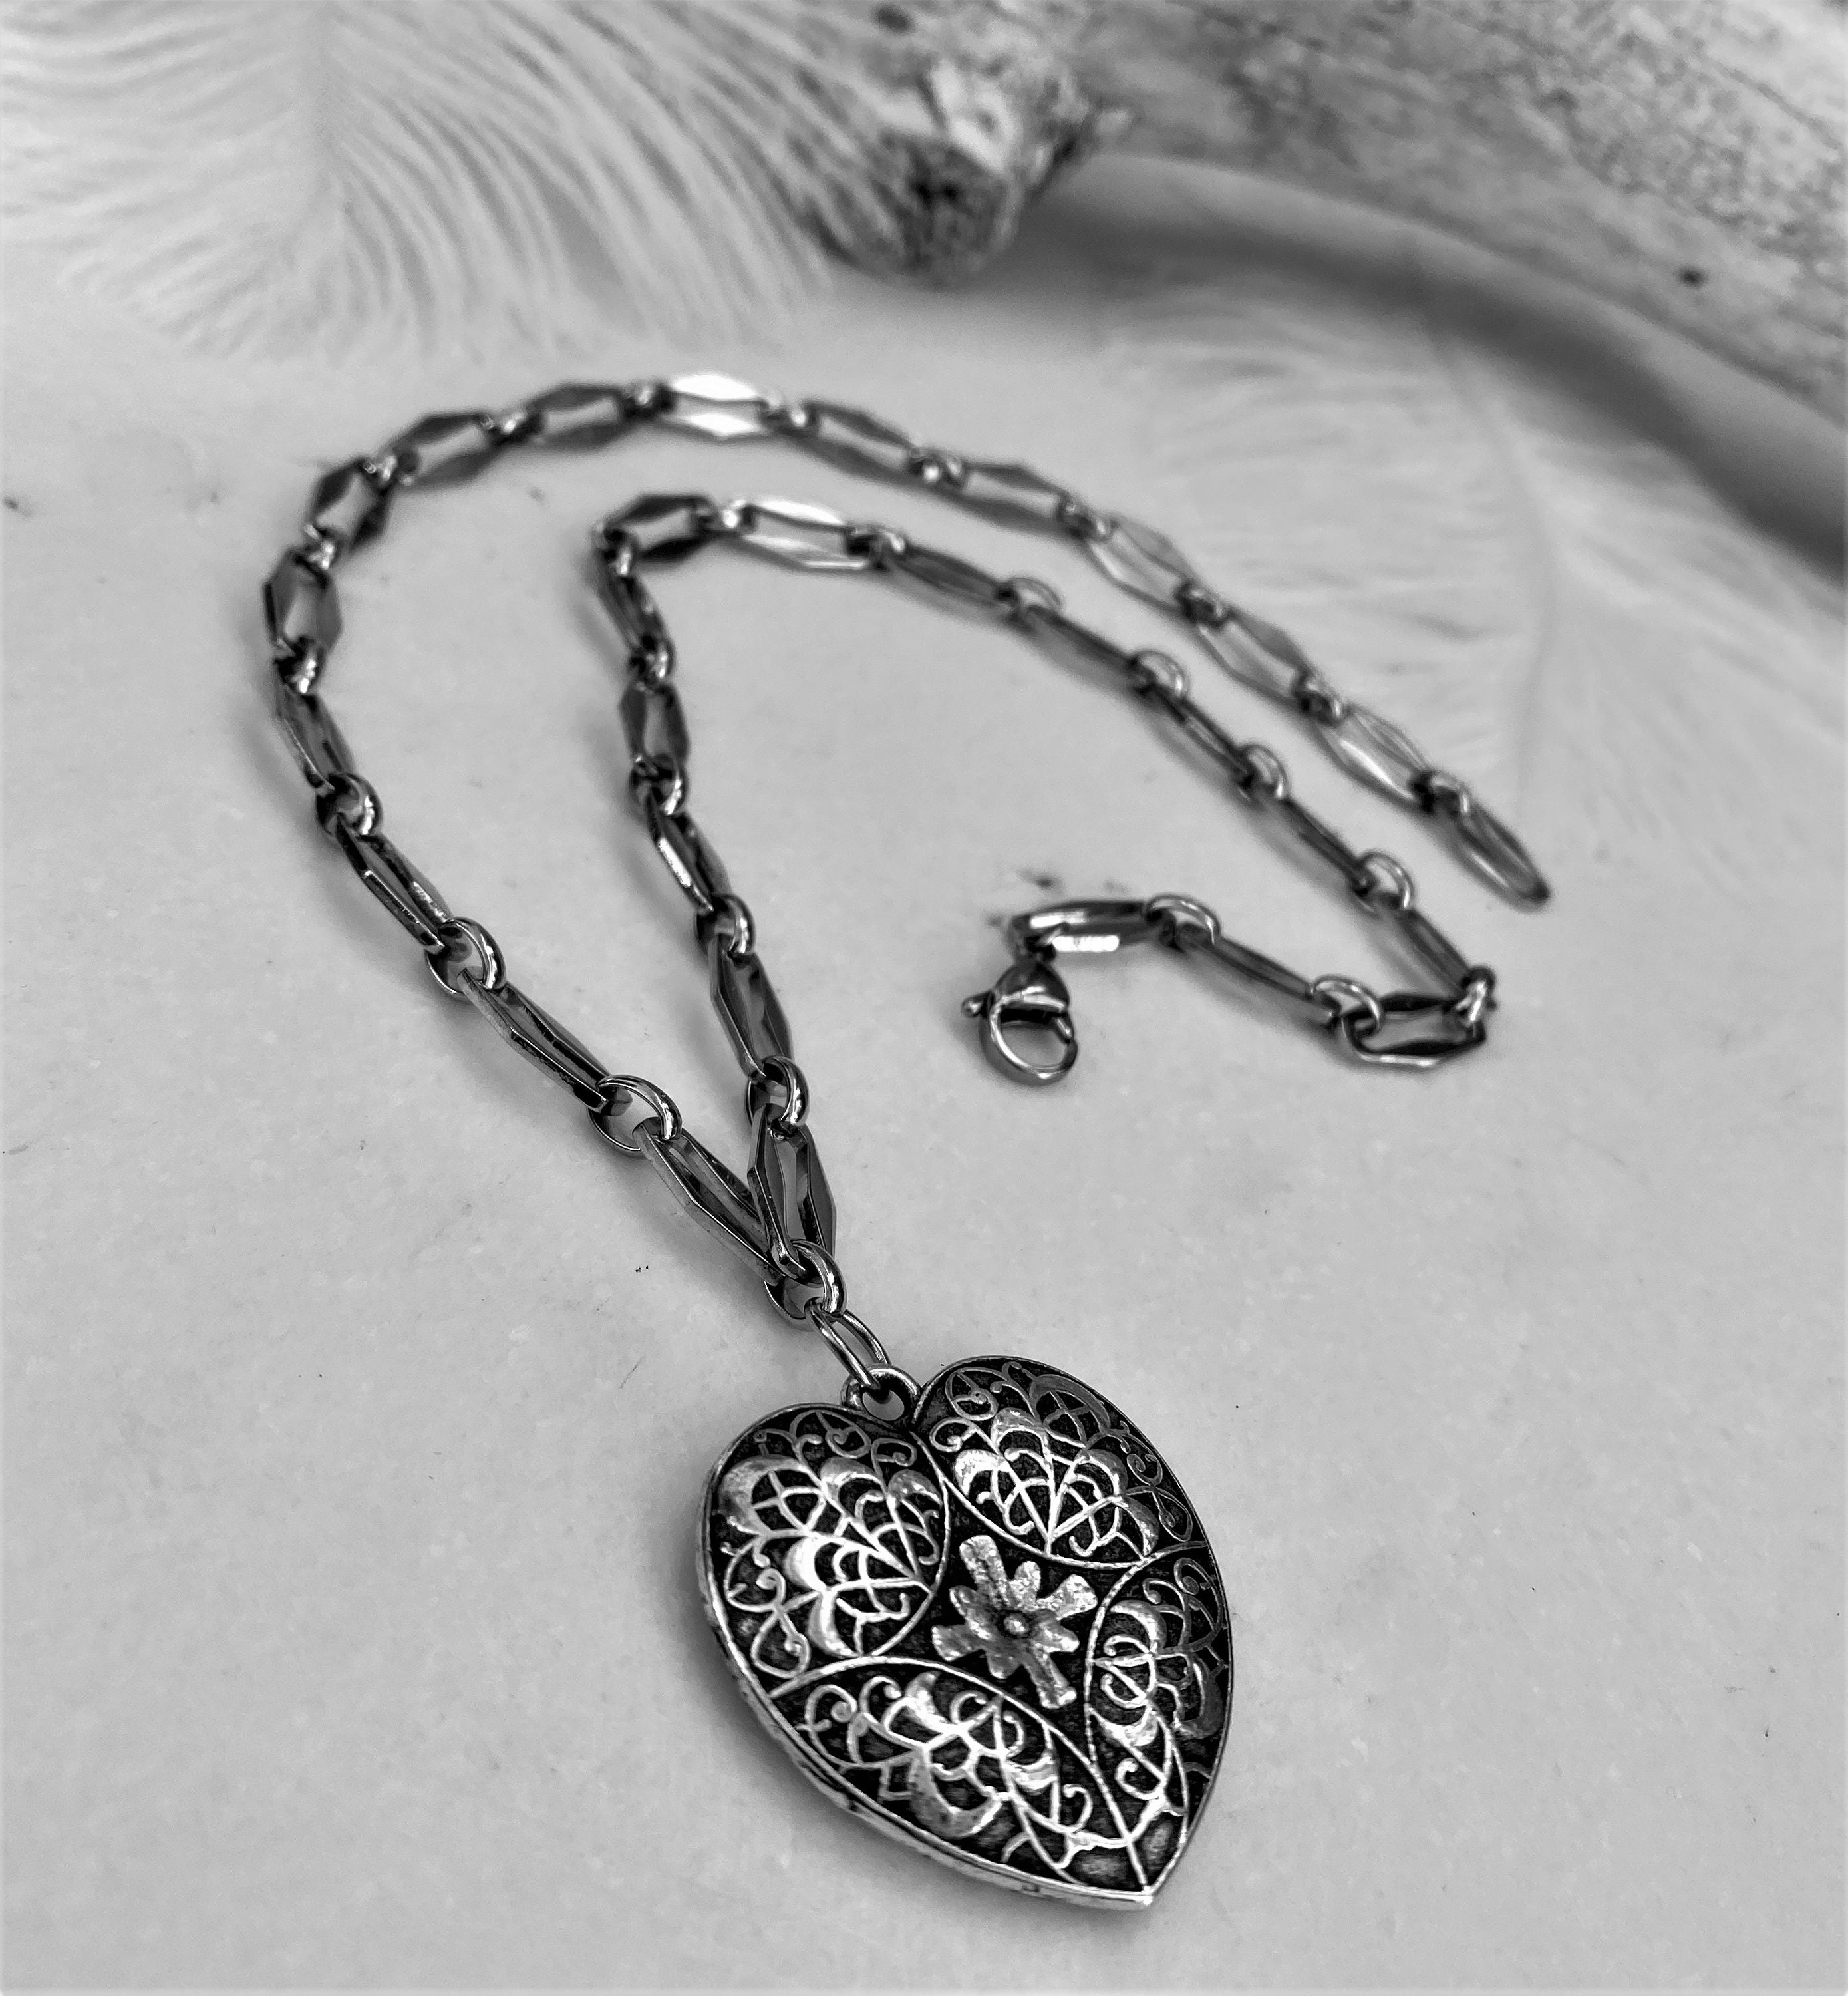 Chunky Engraved Heart Thick Chain Necklace, Dark Silver Large Heart Link Chain Necklace, Modern Rock Style Heart Chain Pendant, Gift for Her